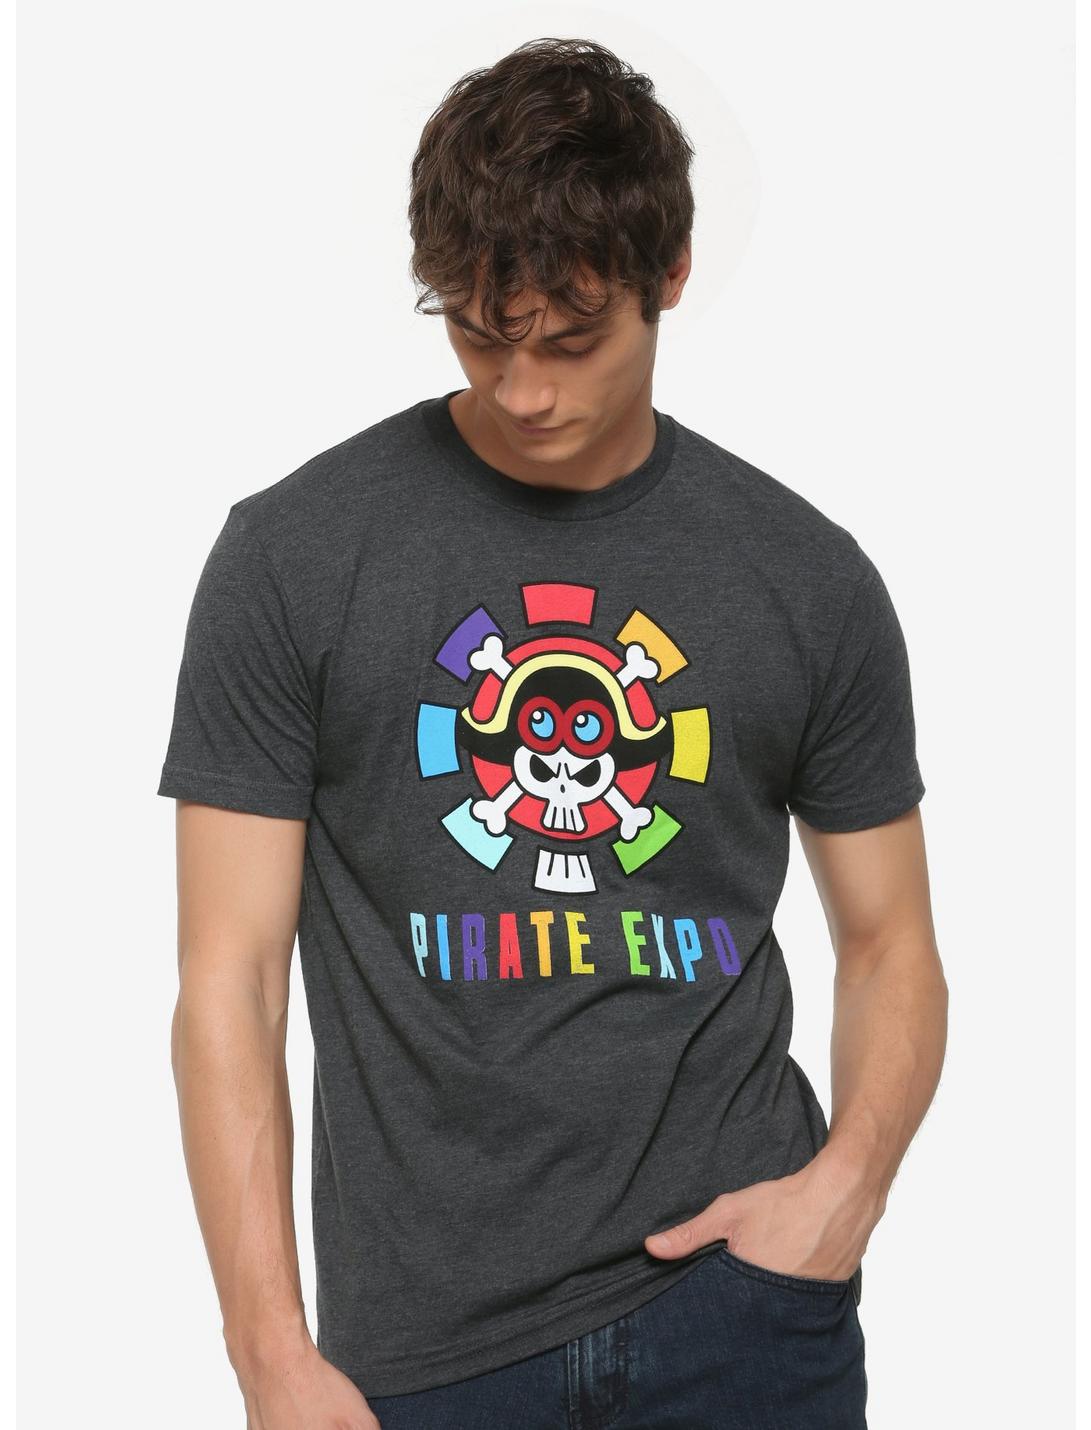 One Piece: Stampede Pirate Expo T-Shirt, GREY, hi-res